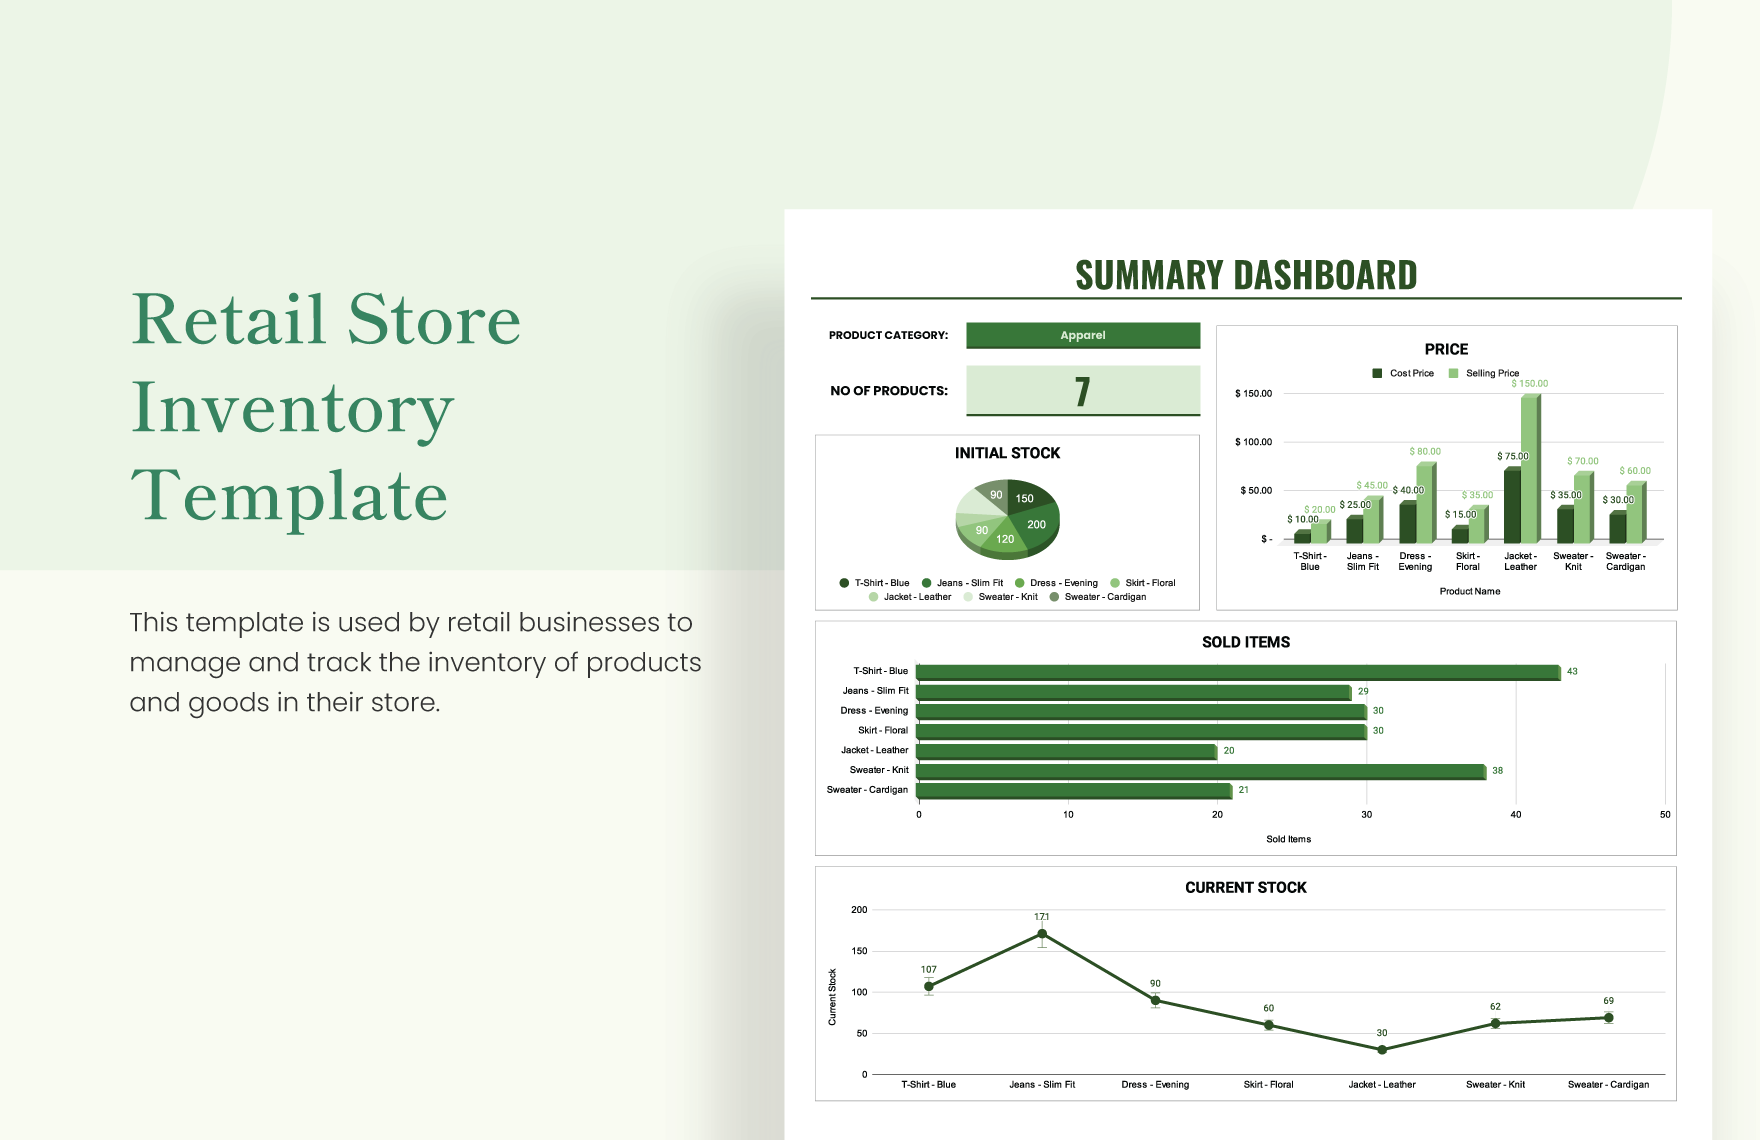 Retail Store Inventory Template